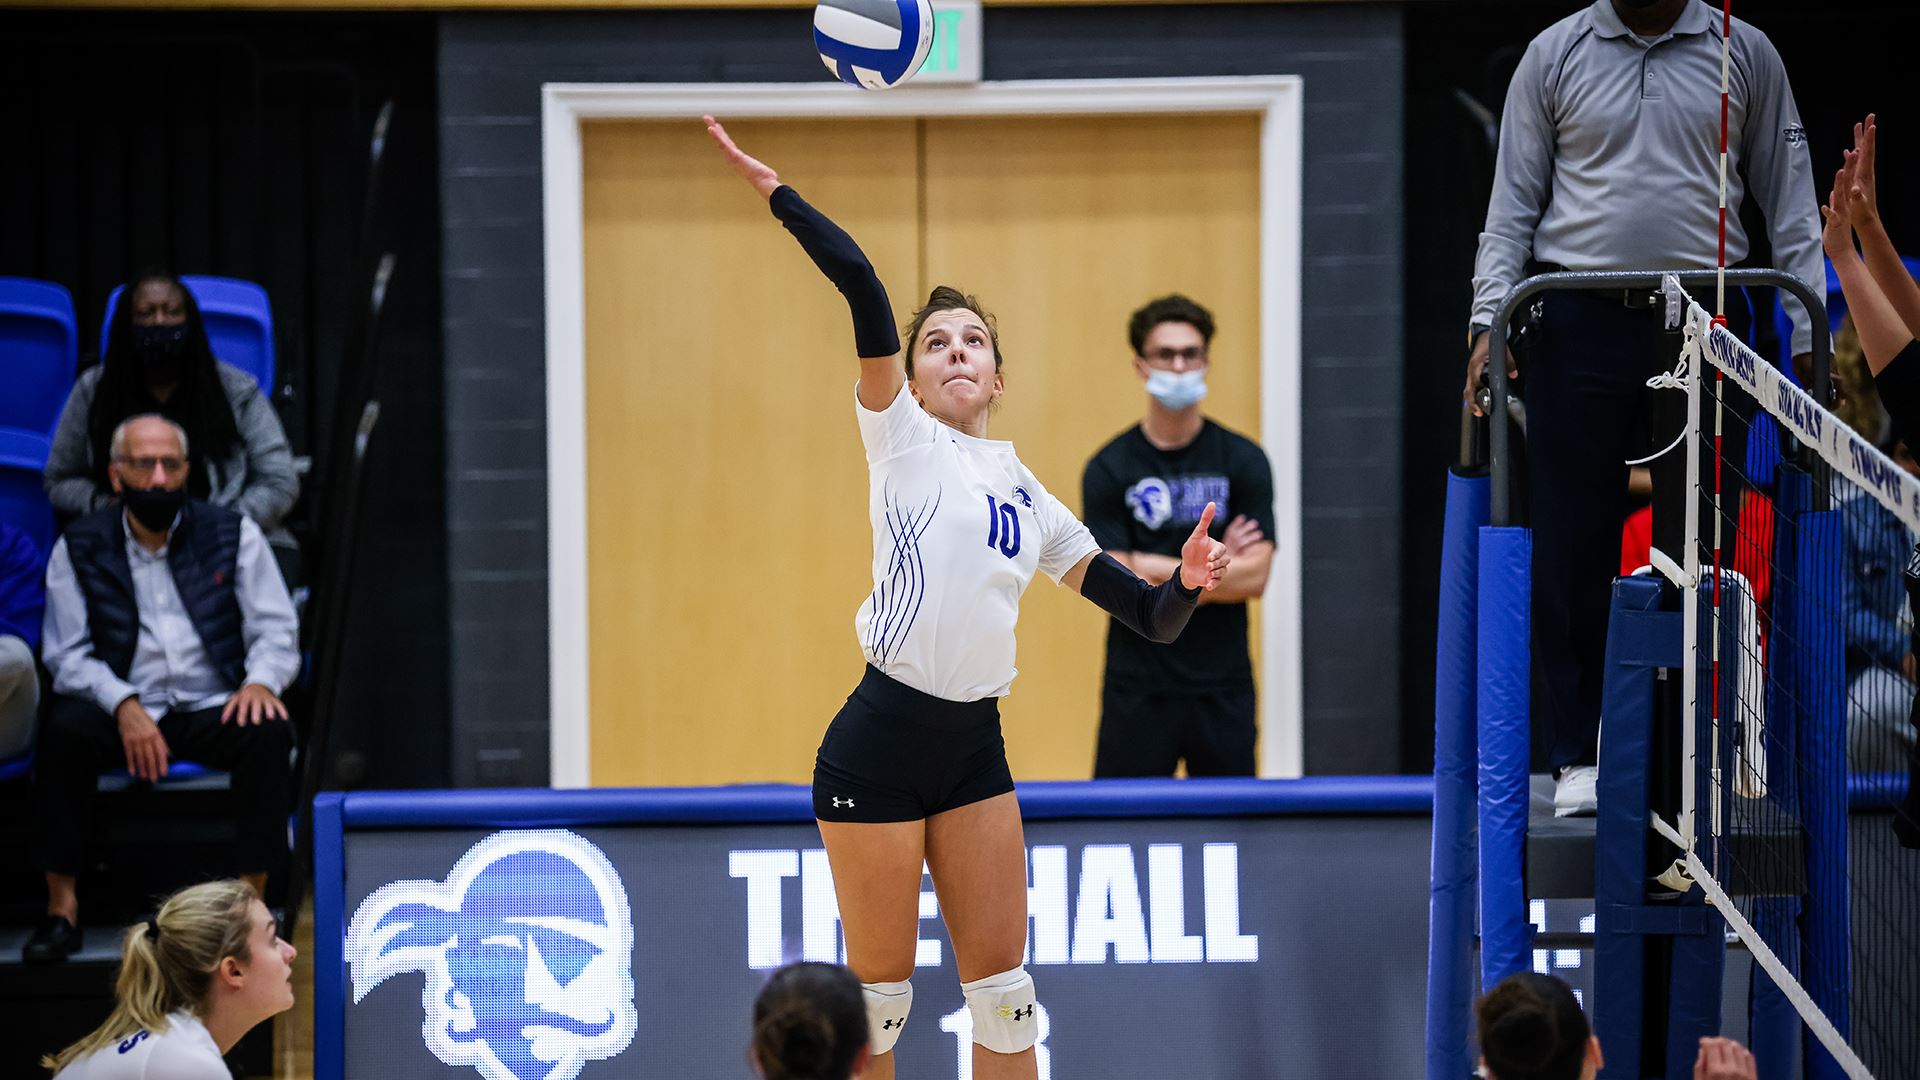 Ilieva spikes the ball during a Seton Hall women's volleyball match against Butler.